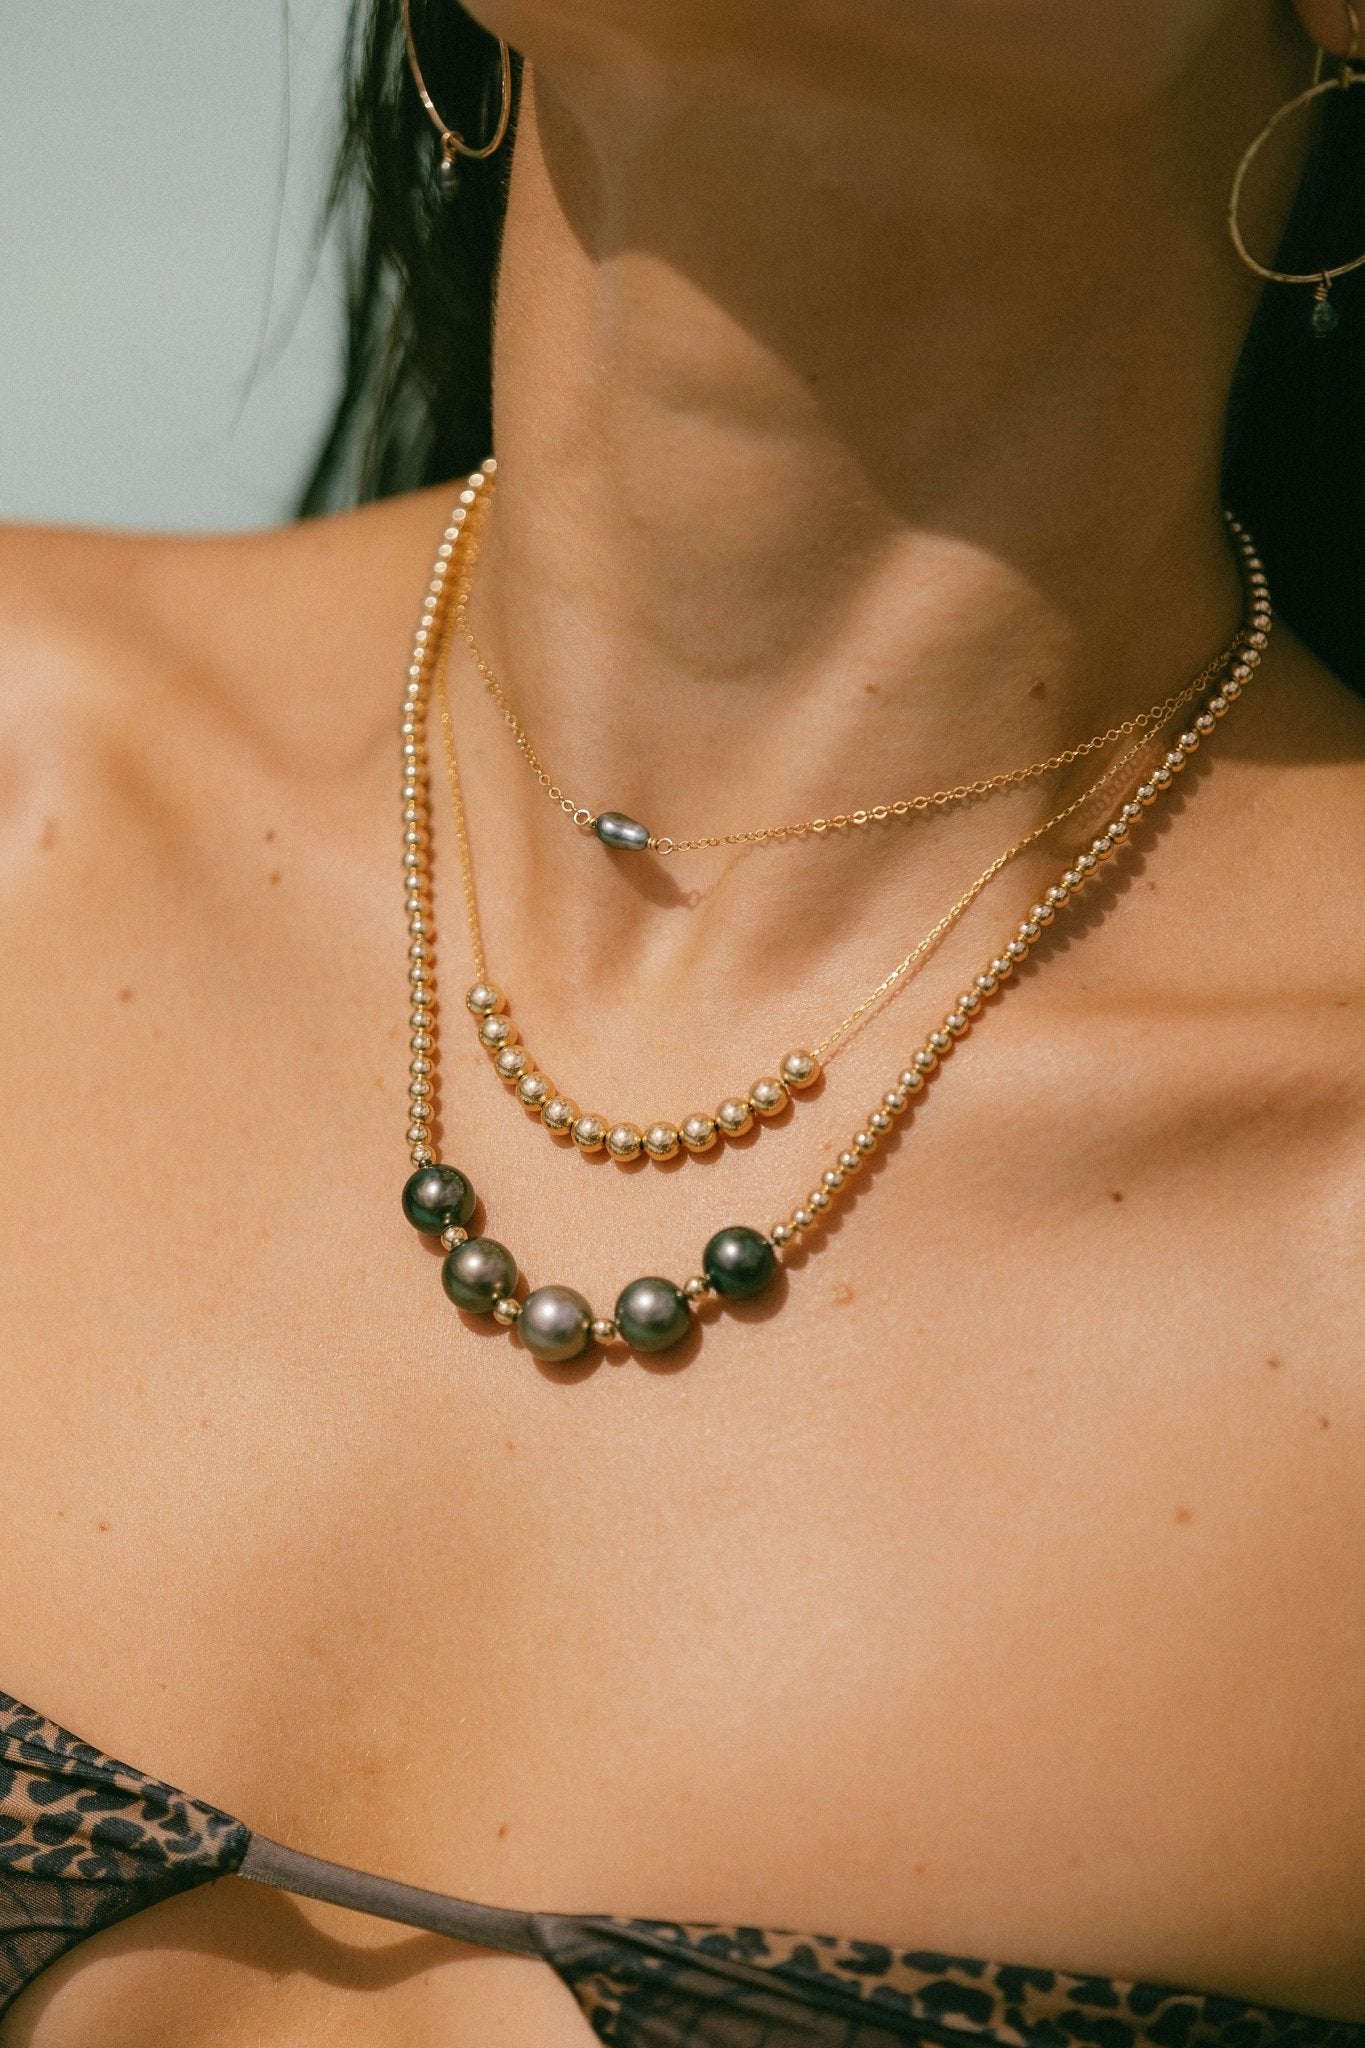 Gold Filled Bead Necklace - Kahakai Collections